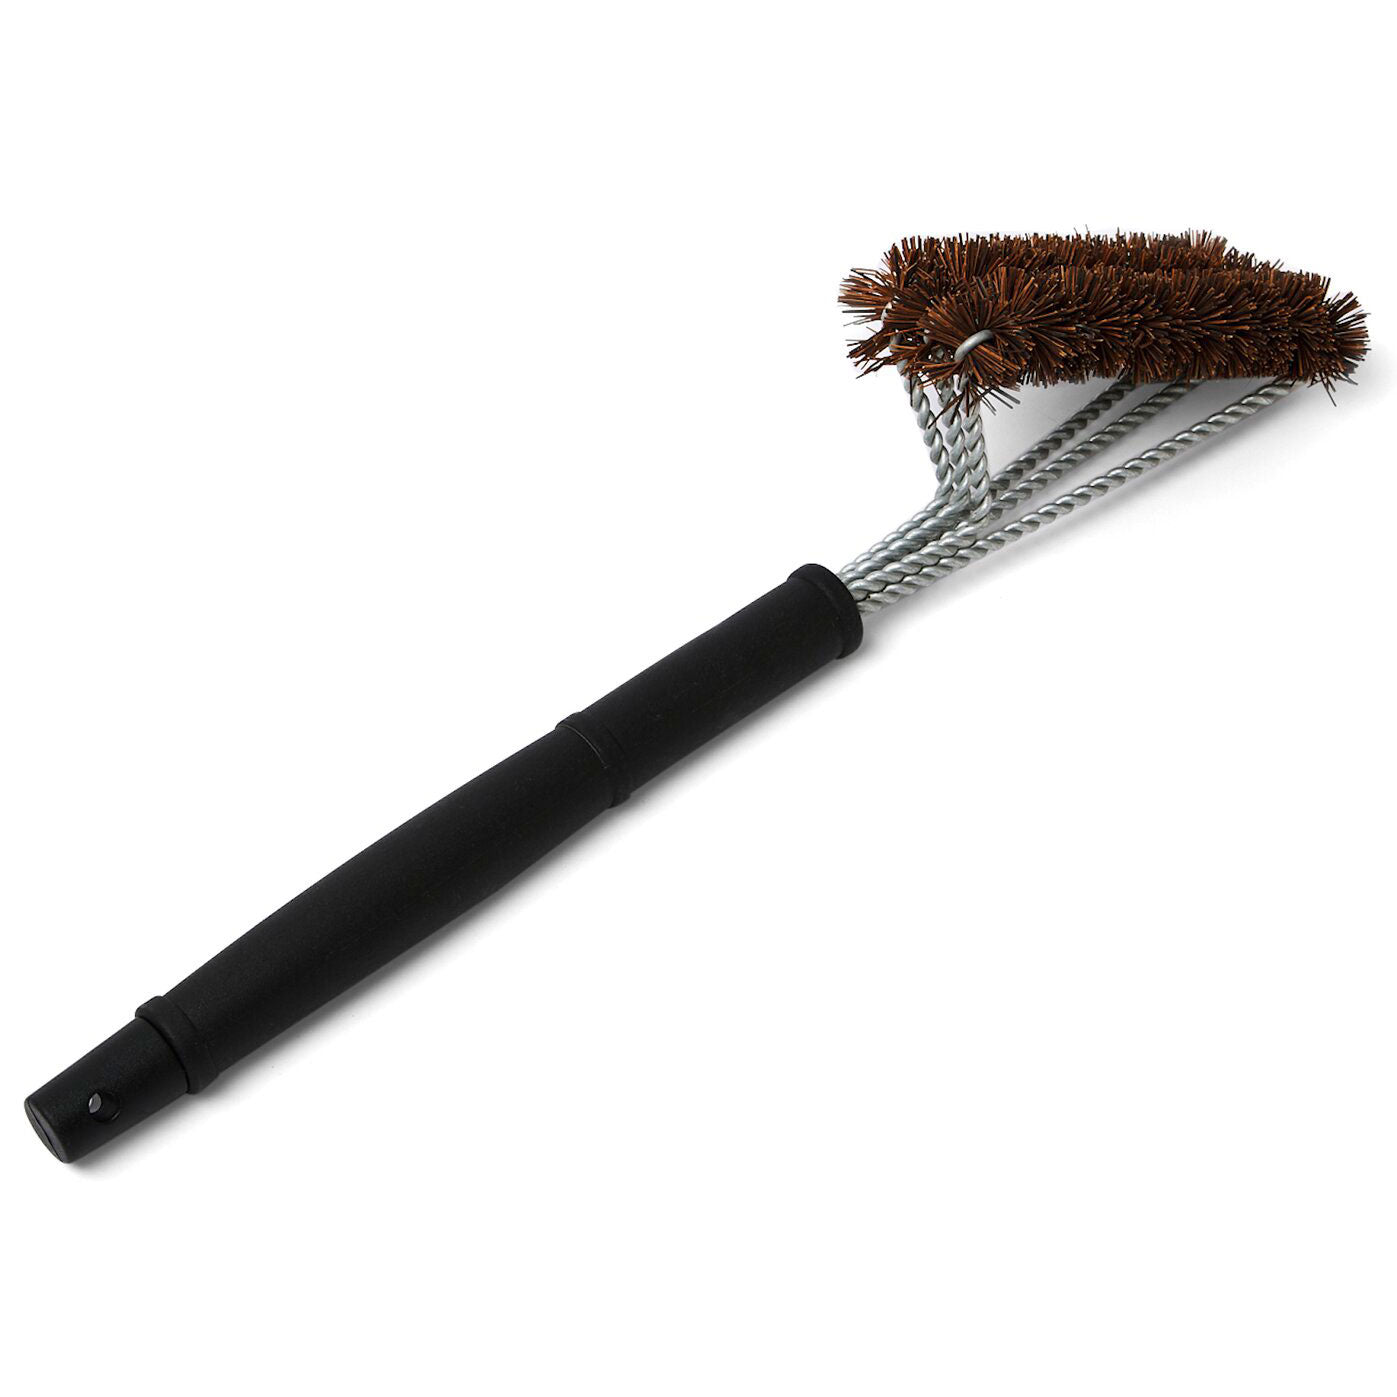 Barbecue Grill Cleaning Tool, Bbq Brush, Barbecue Accessories, Stainless  Steel Bbq Cleaner, Bbq Brush, Plastic Handle Cleaning Brush, Outdoor Grill  Cleaner